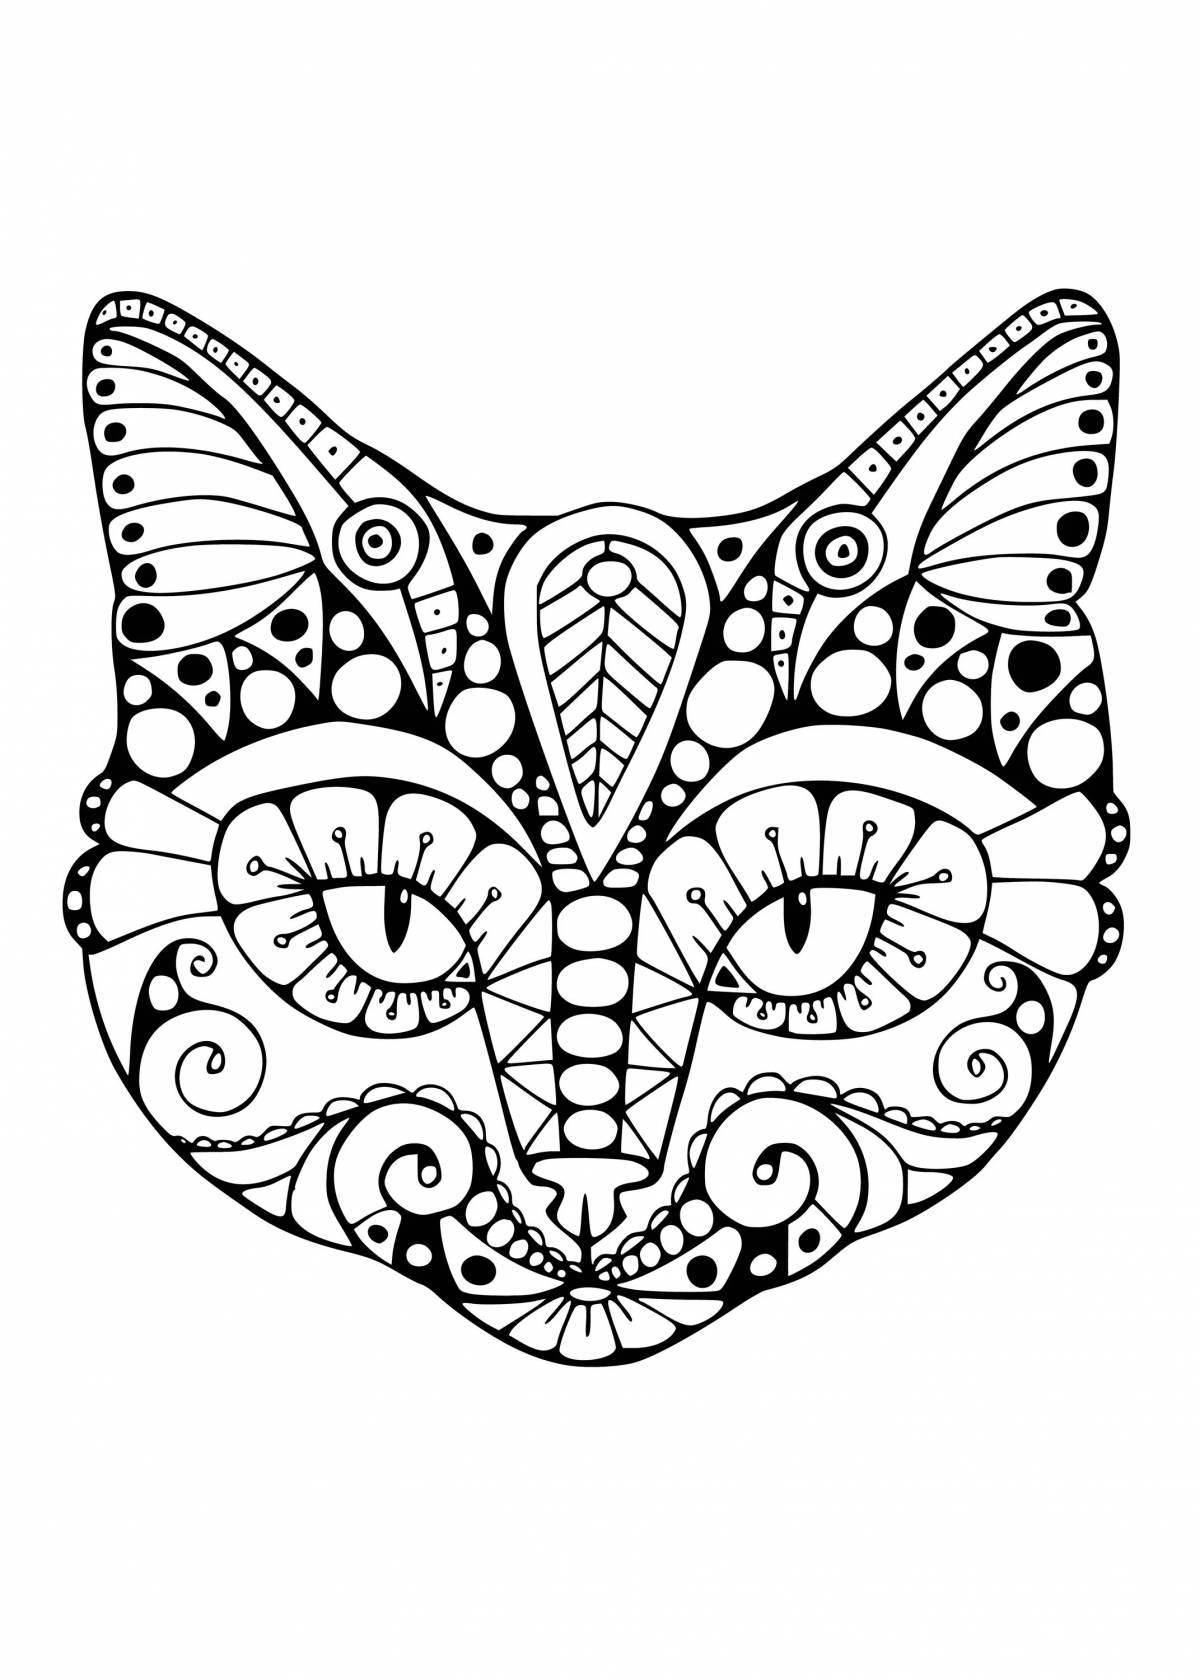 Fine cats coloring pages